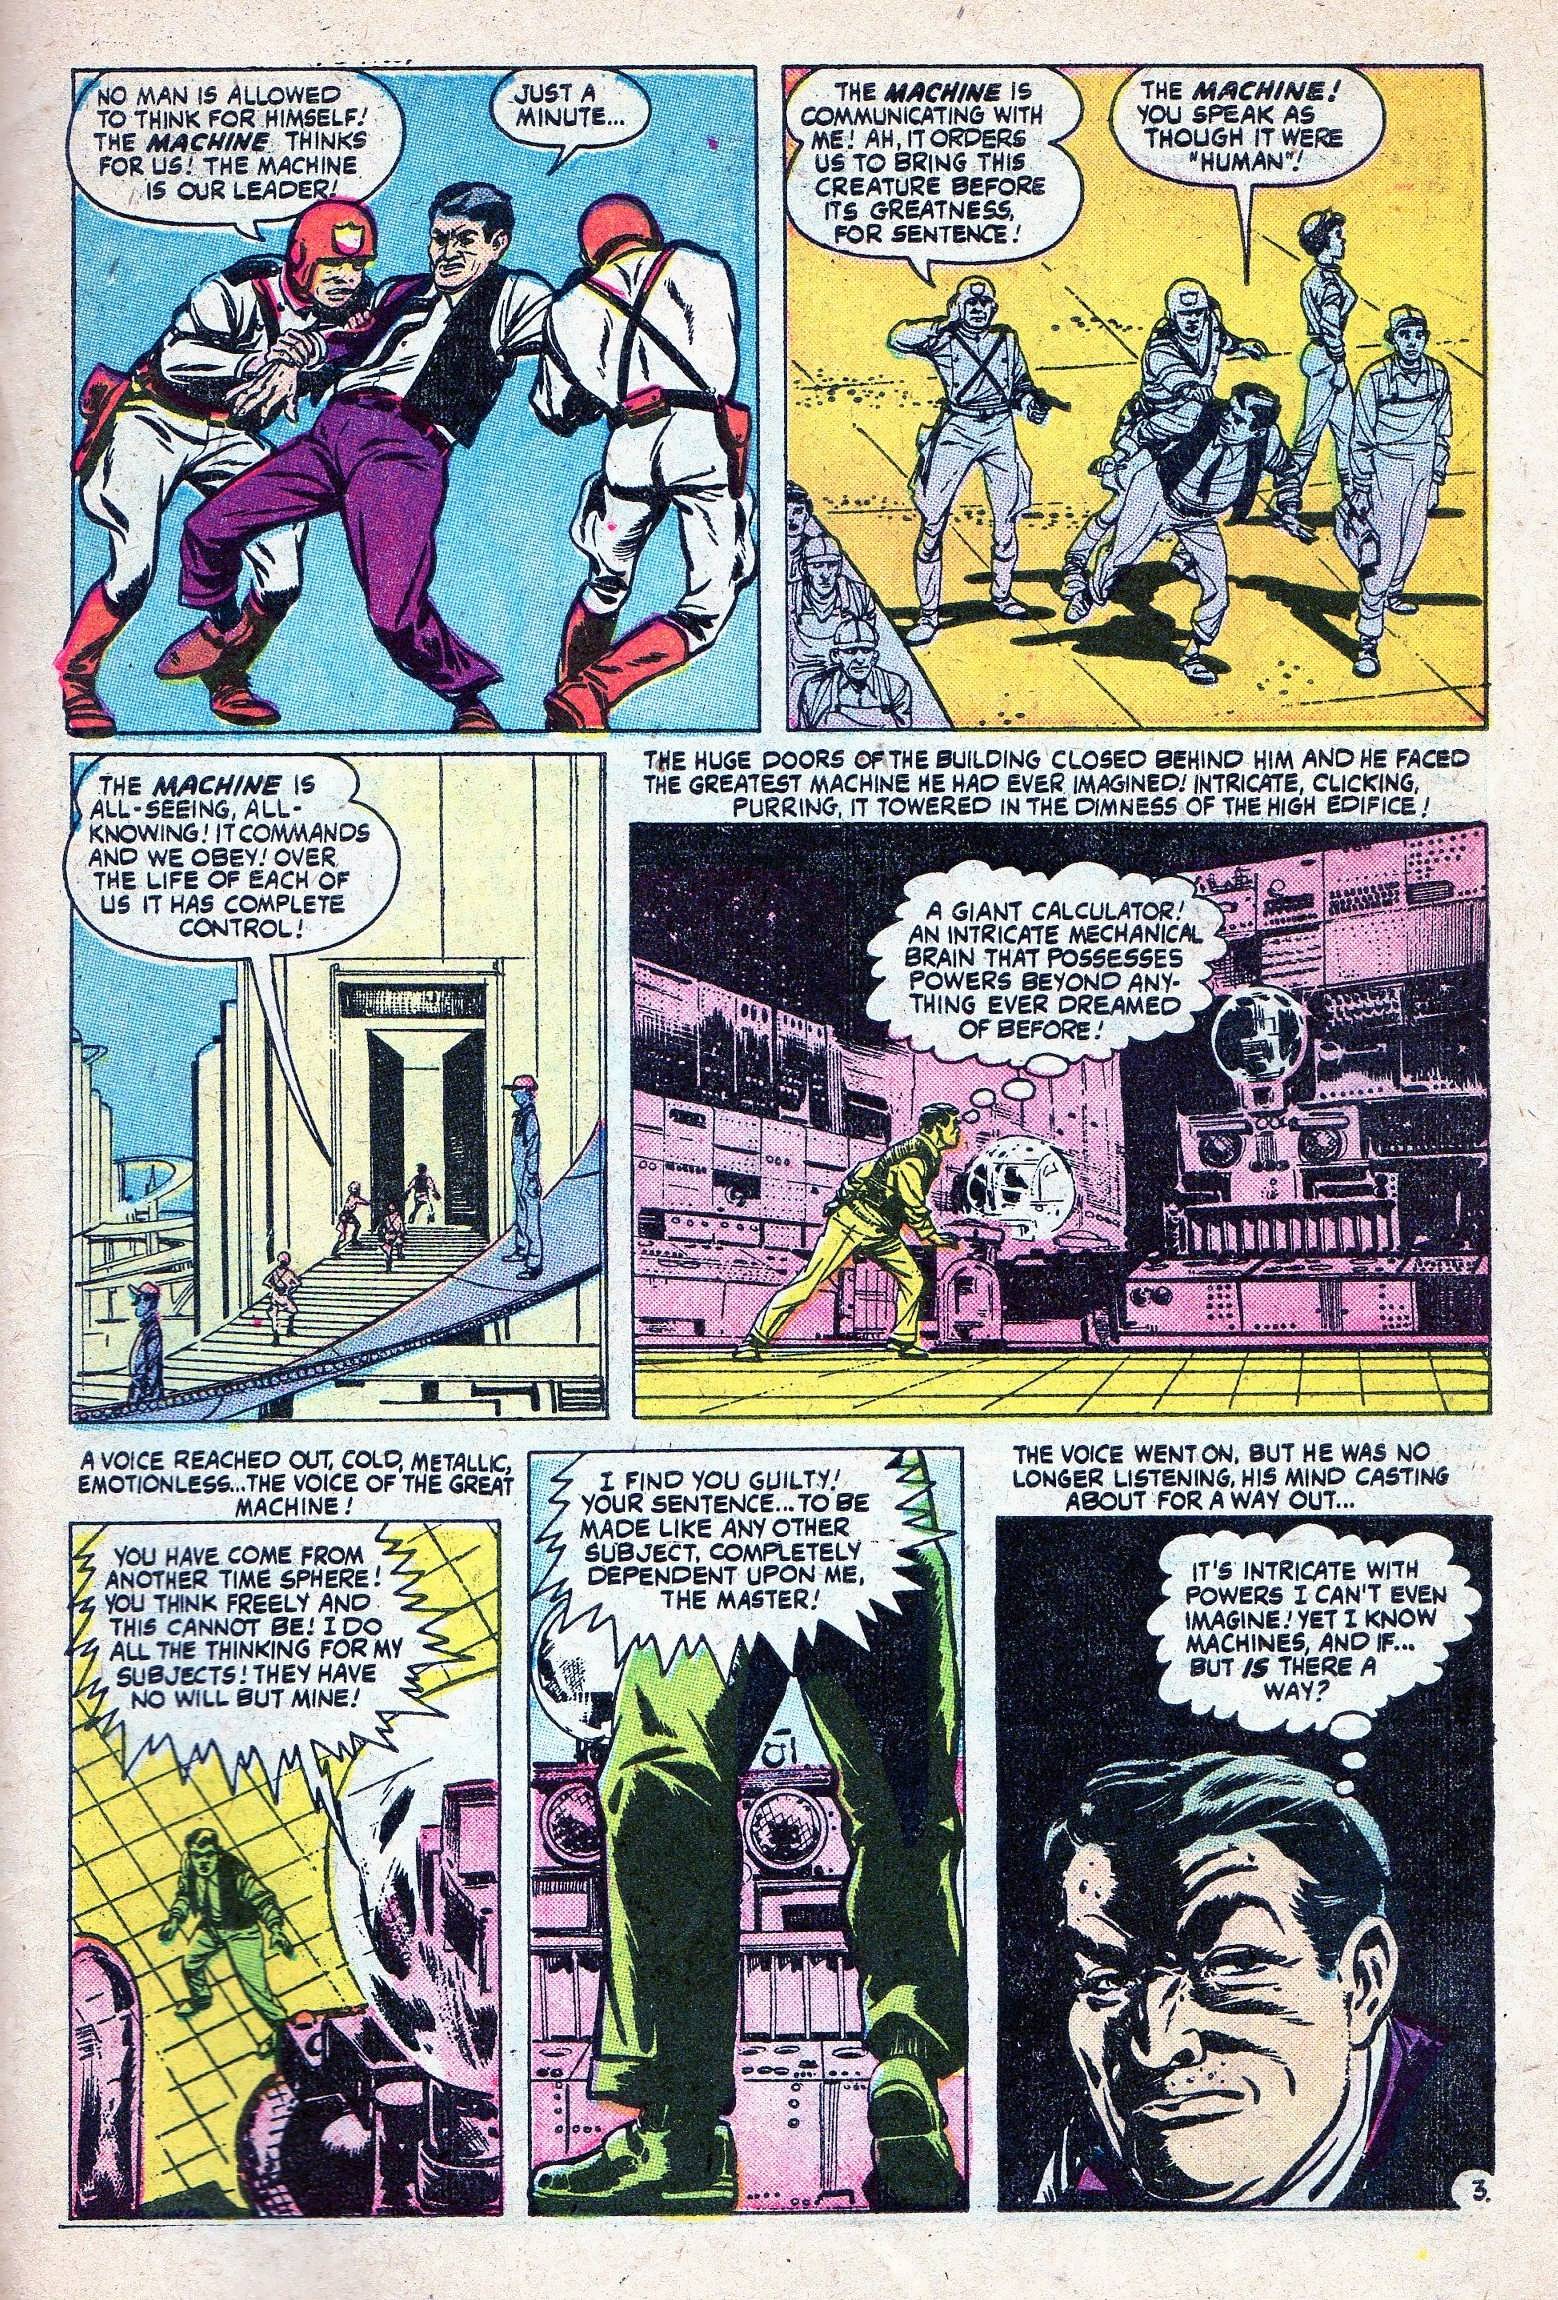 Marvel Tales (1949) 145 Page 29